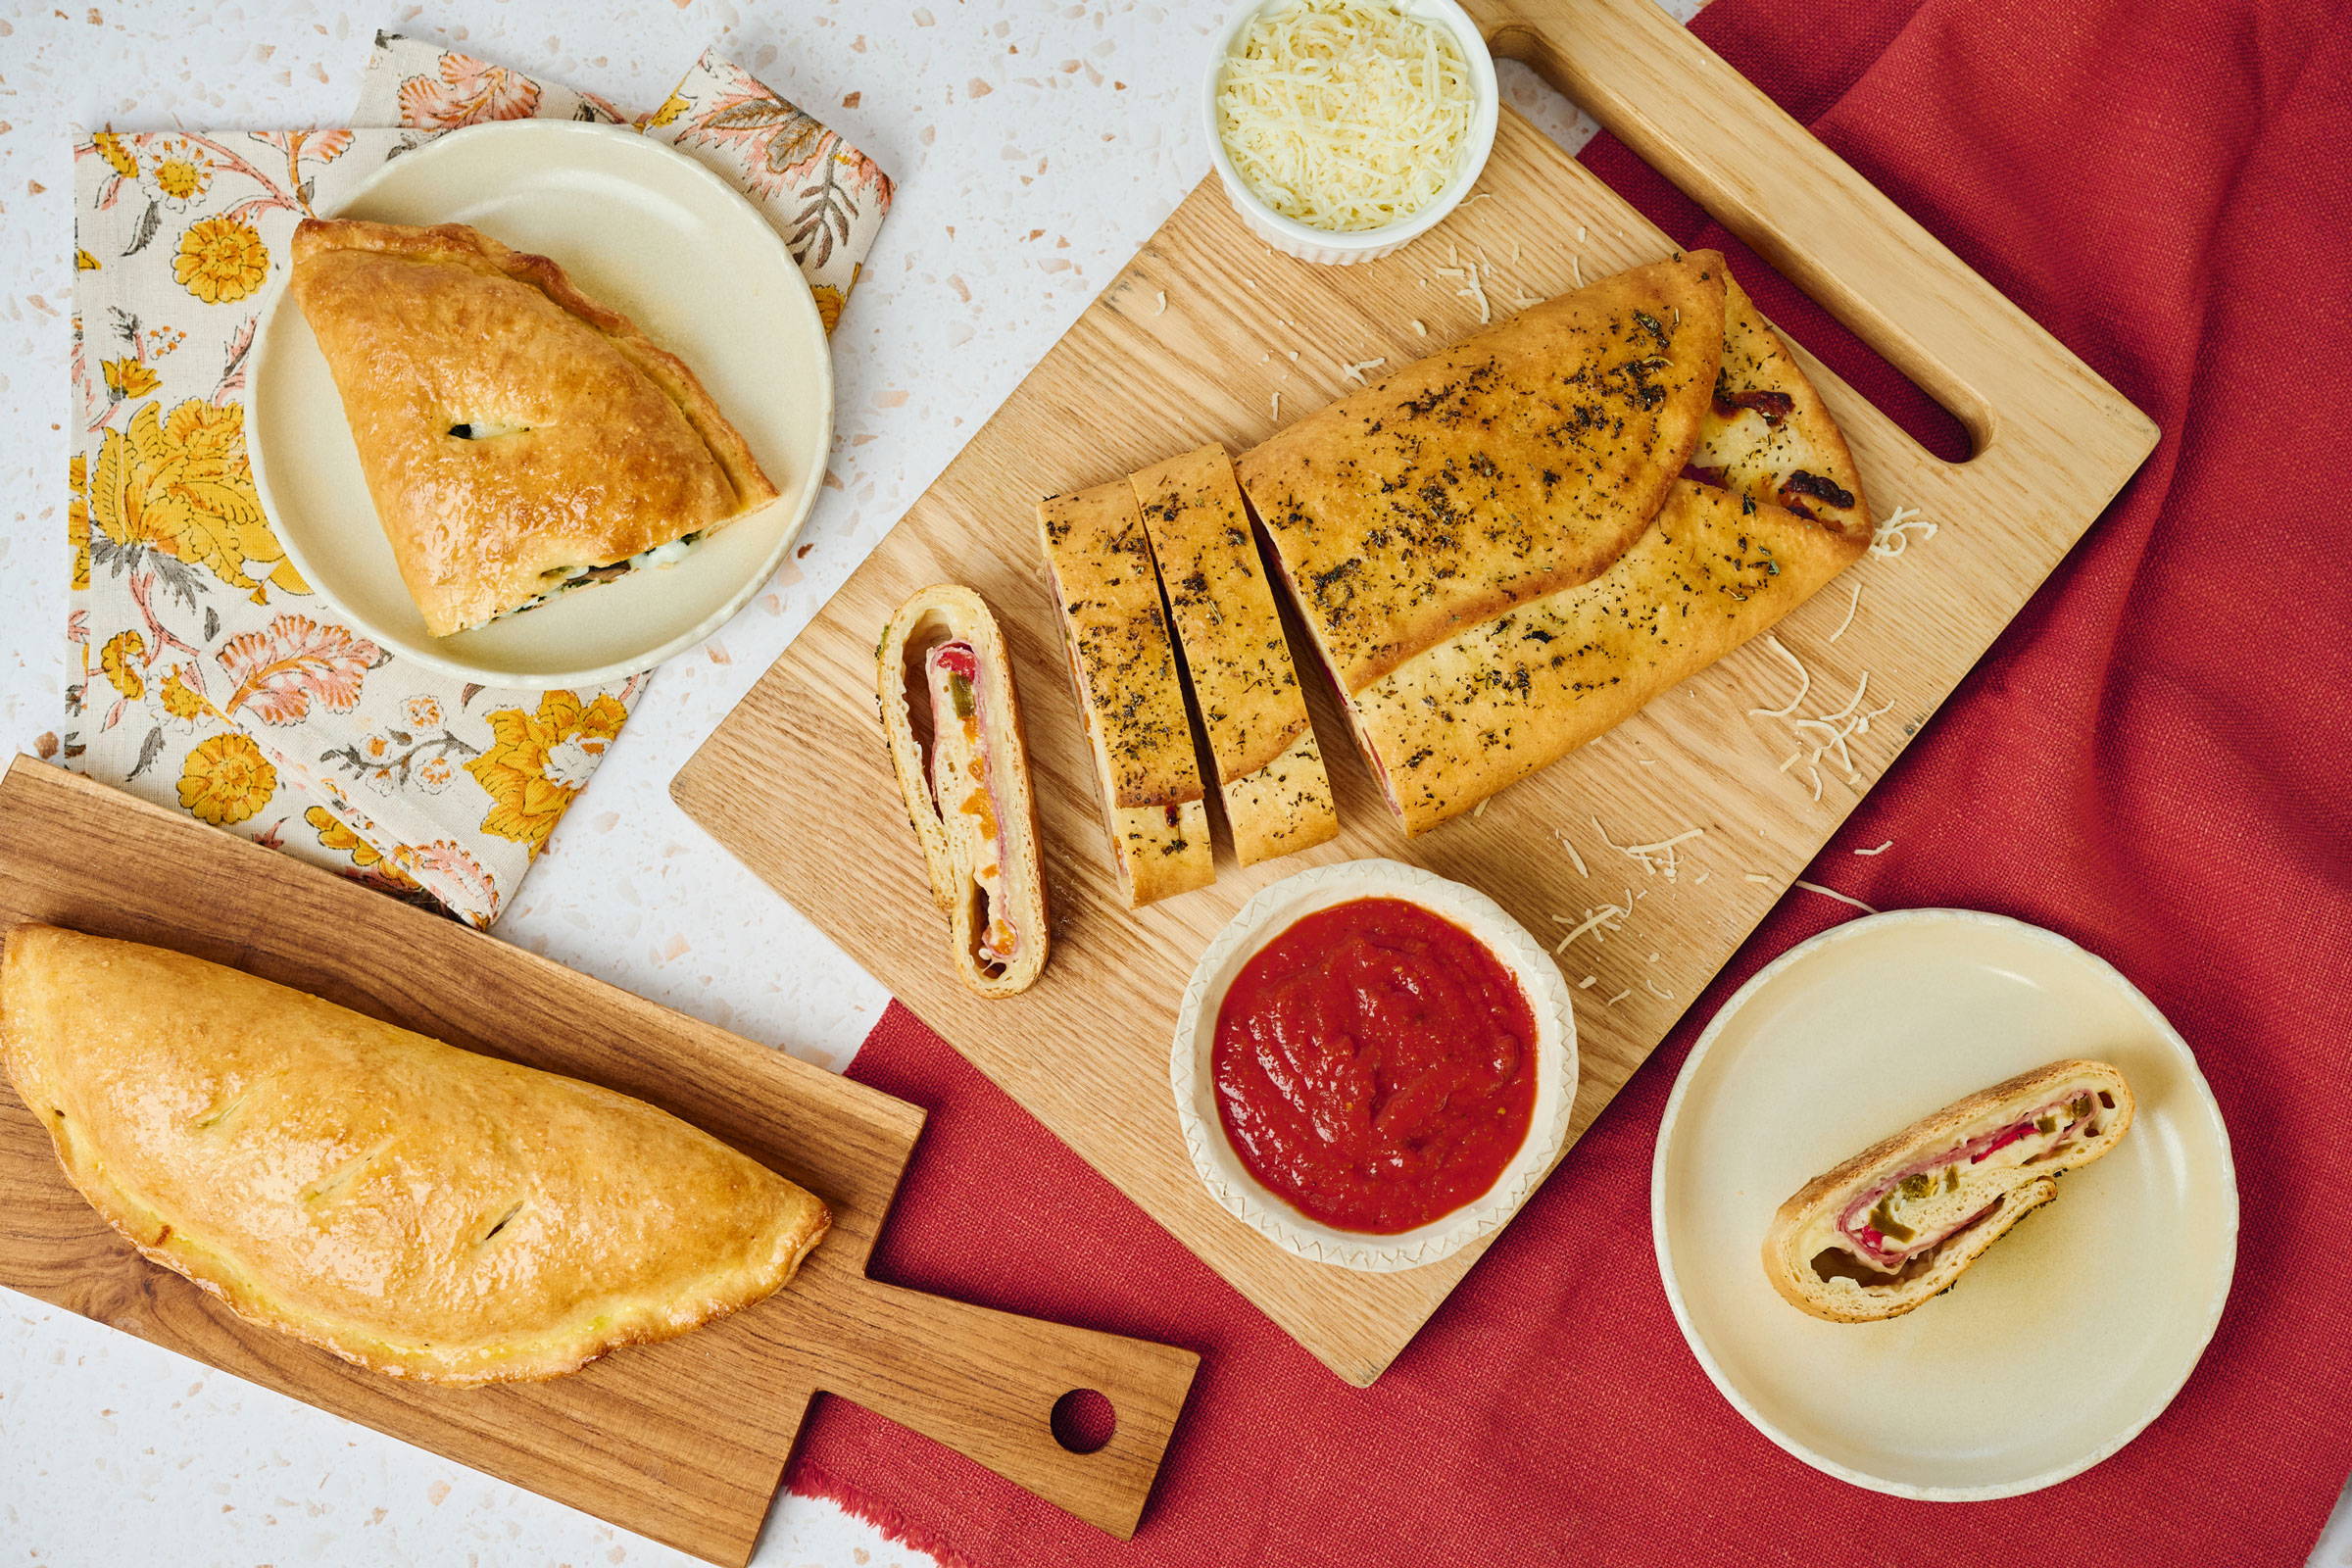 A baked calzone and stromboli sliced and on plates for serving